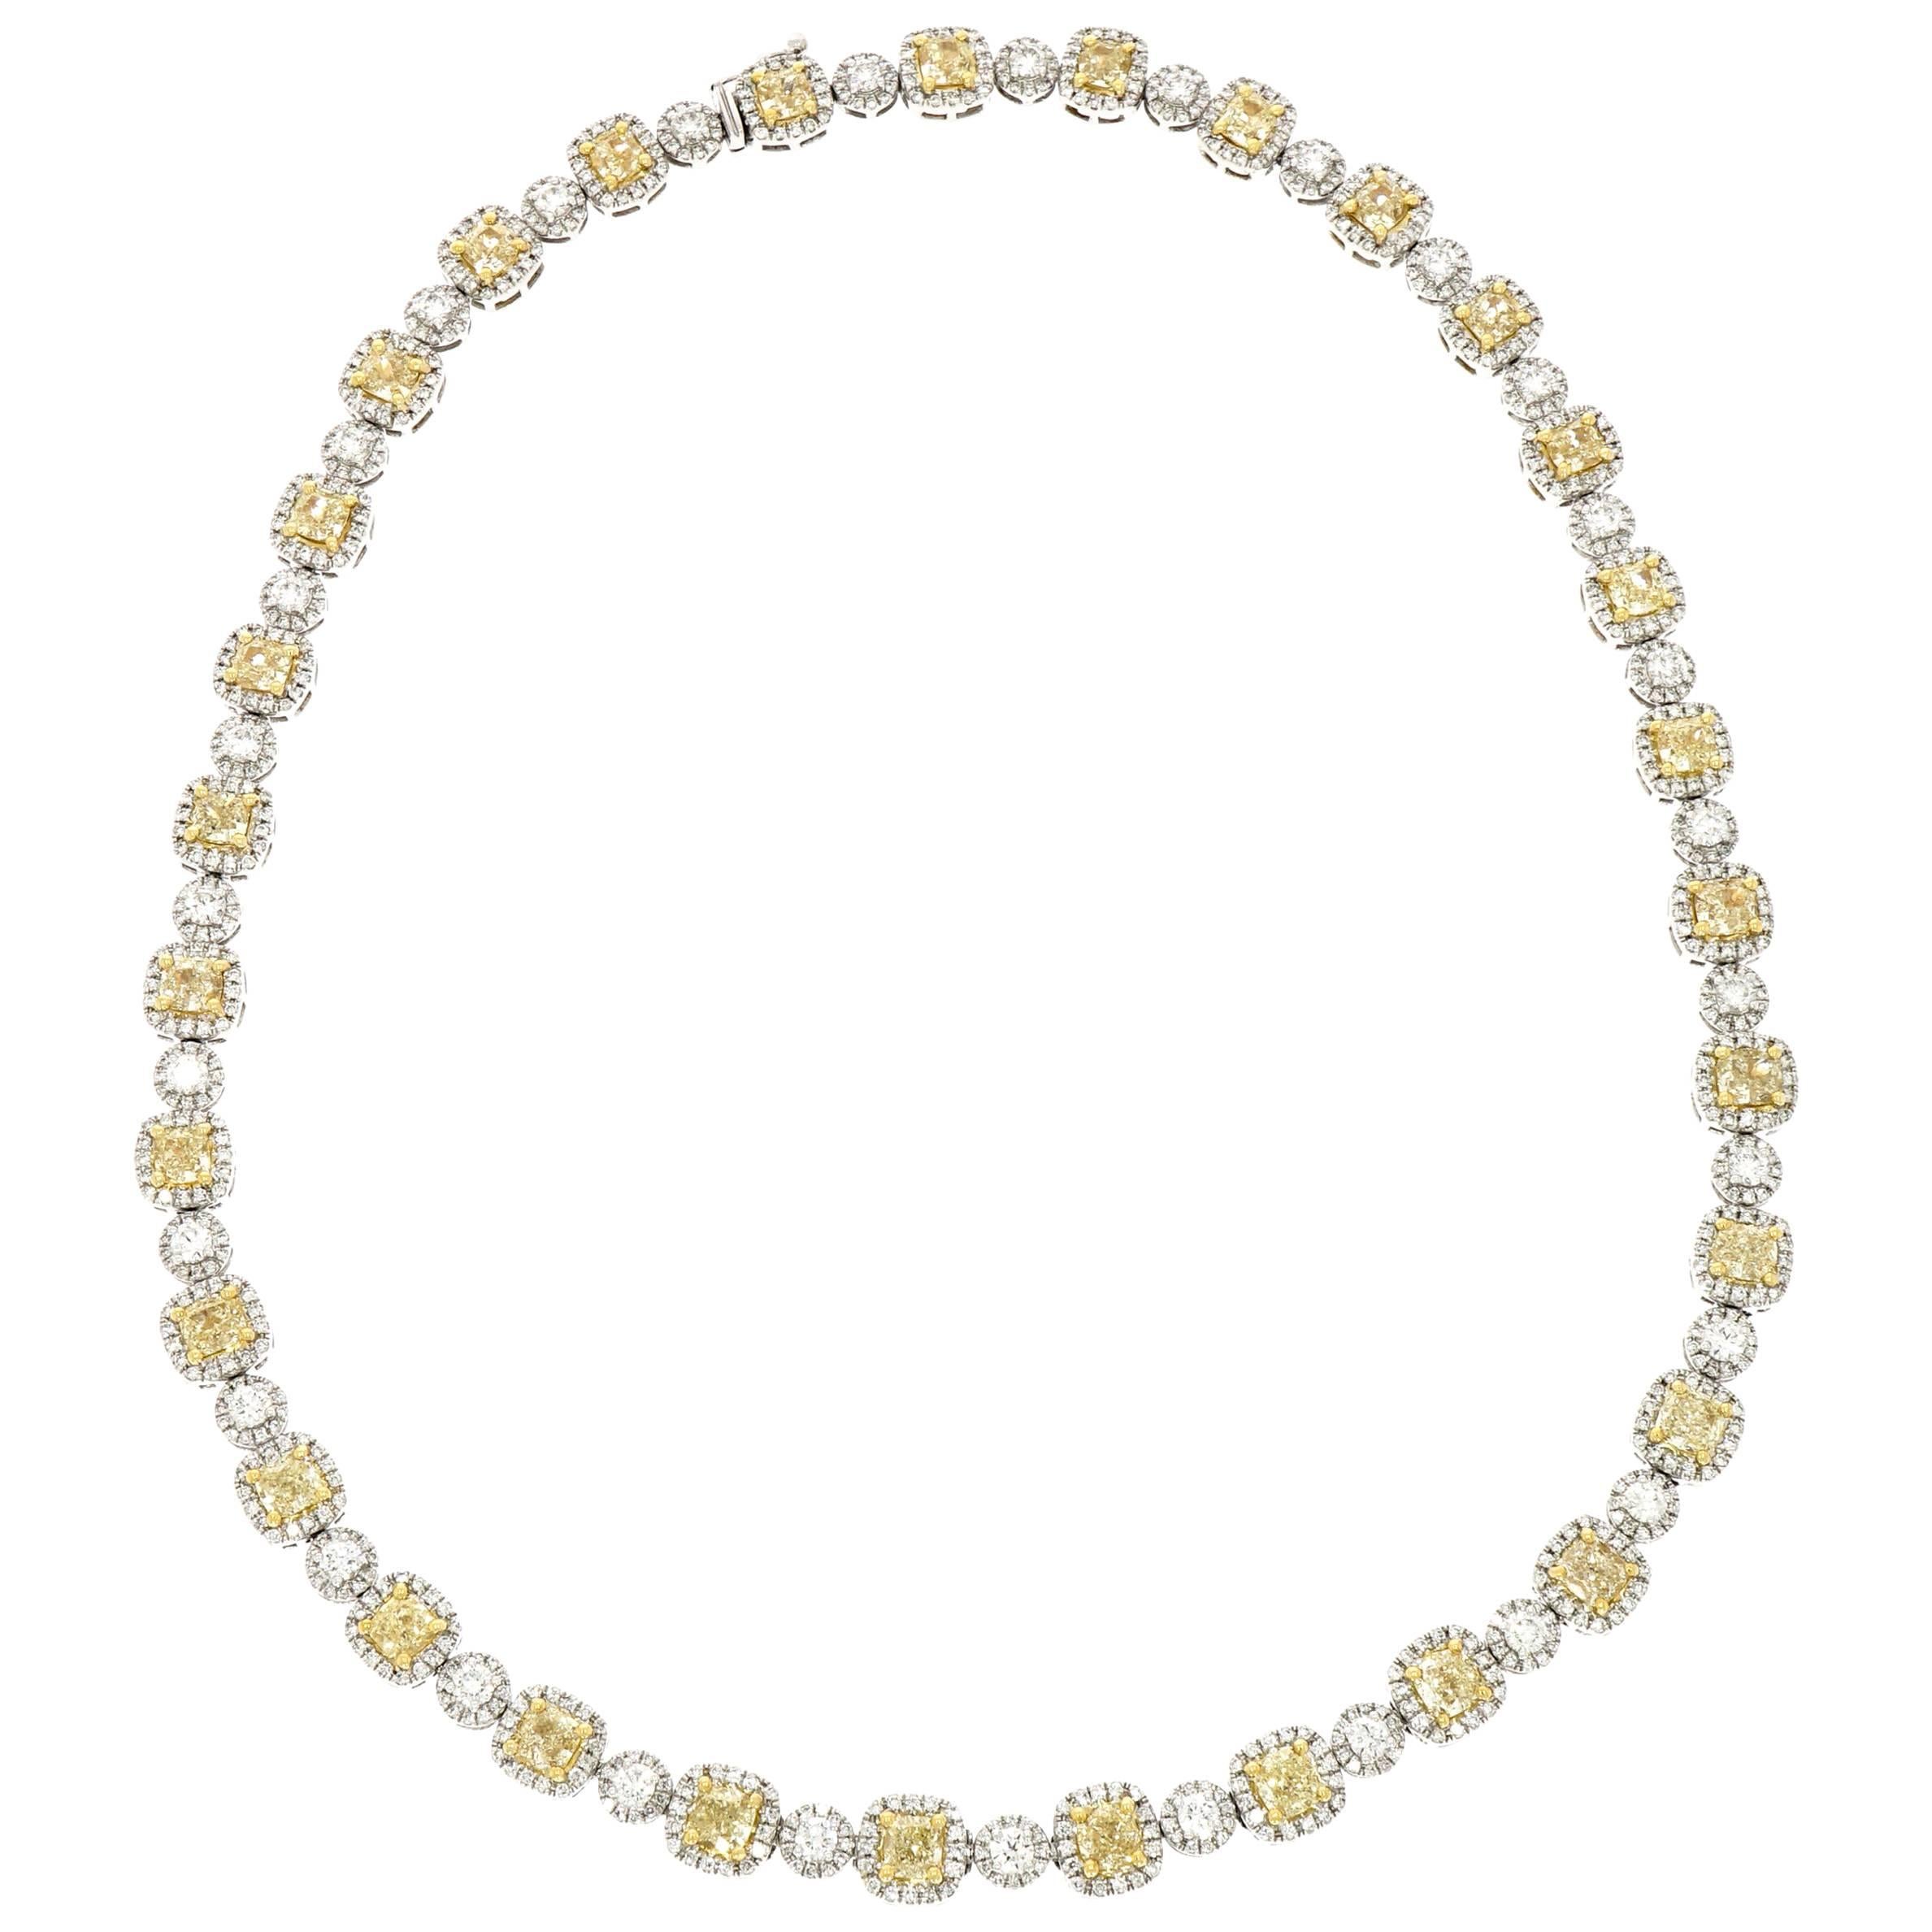 White and Canary Diamond Necklace